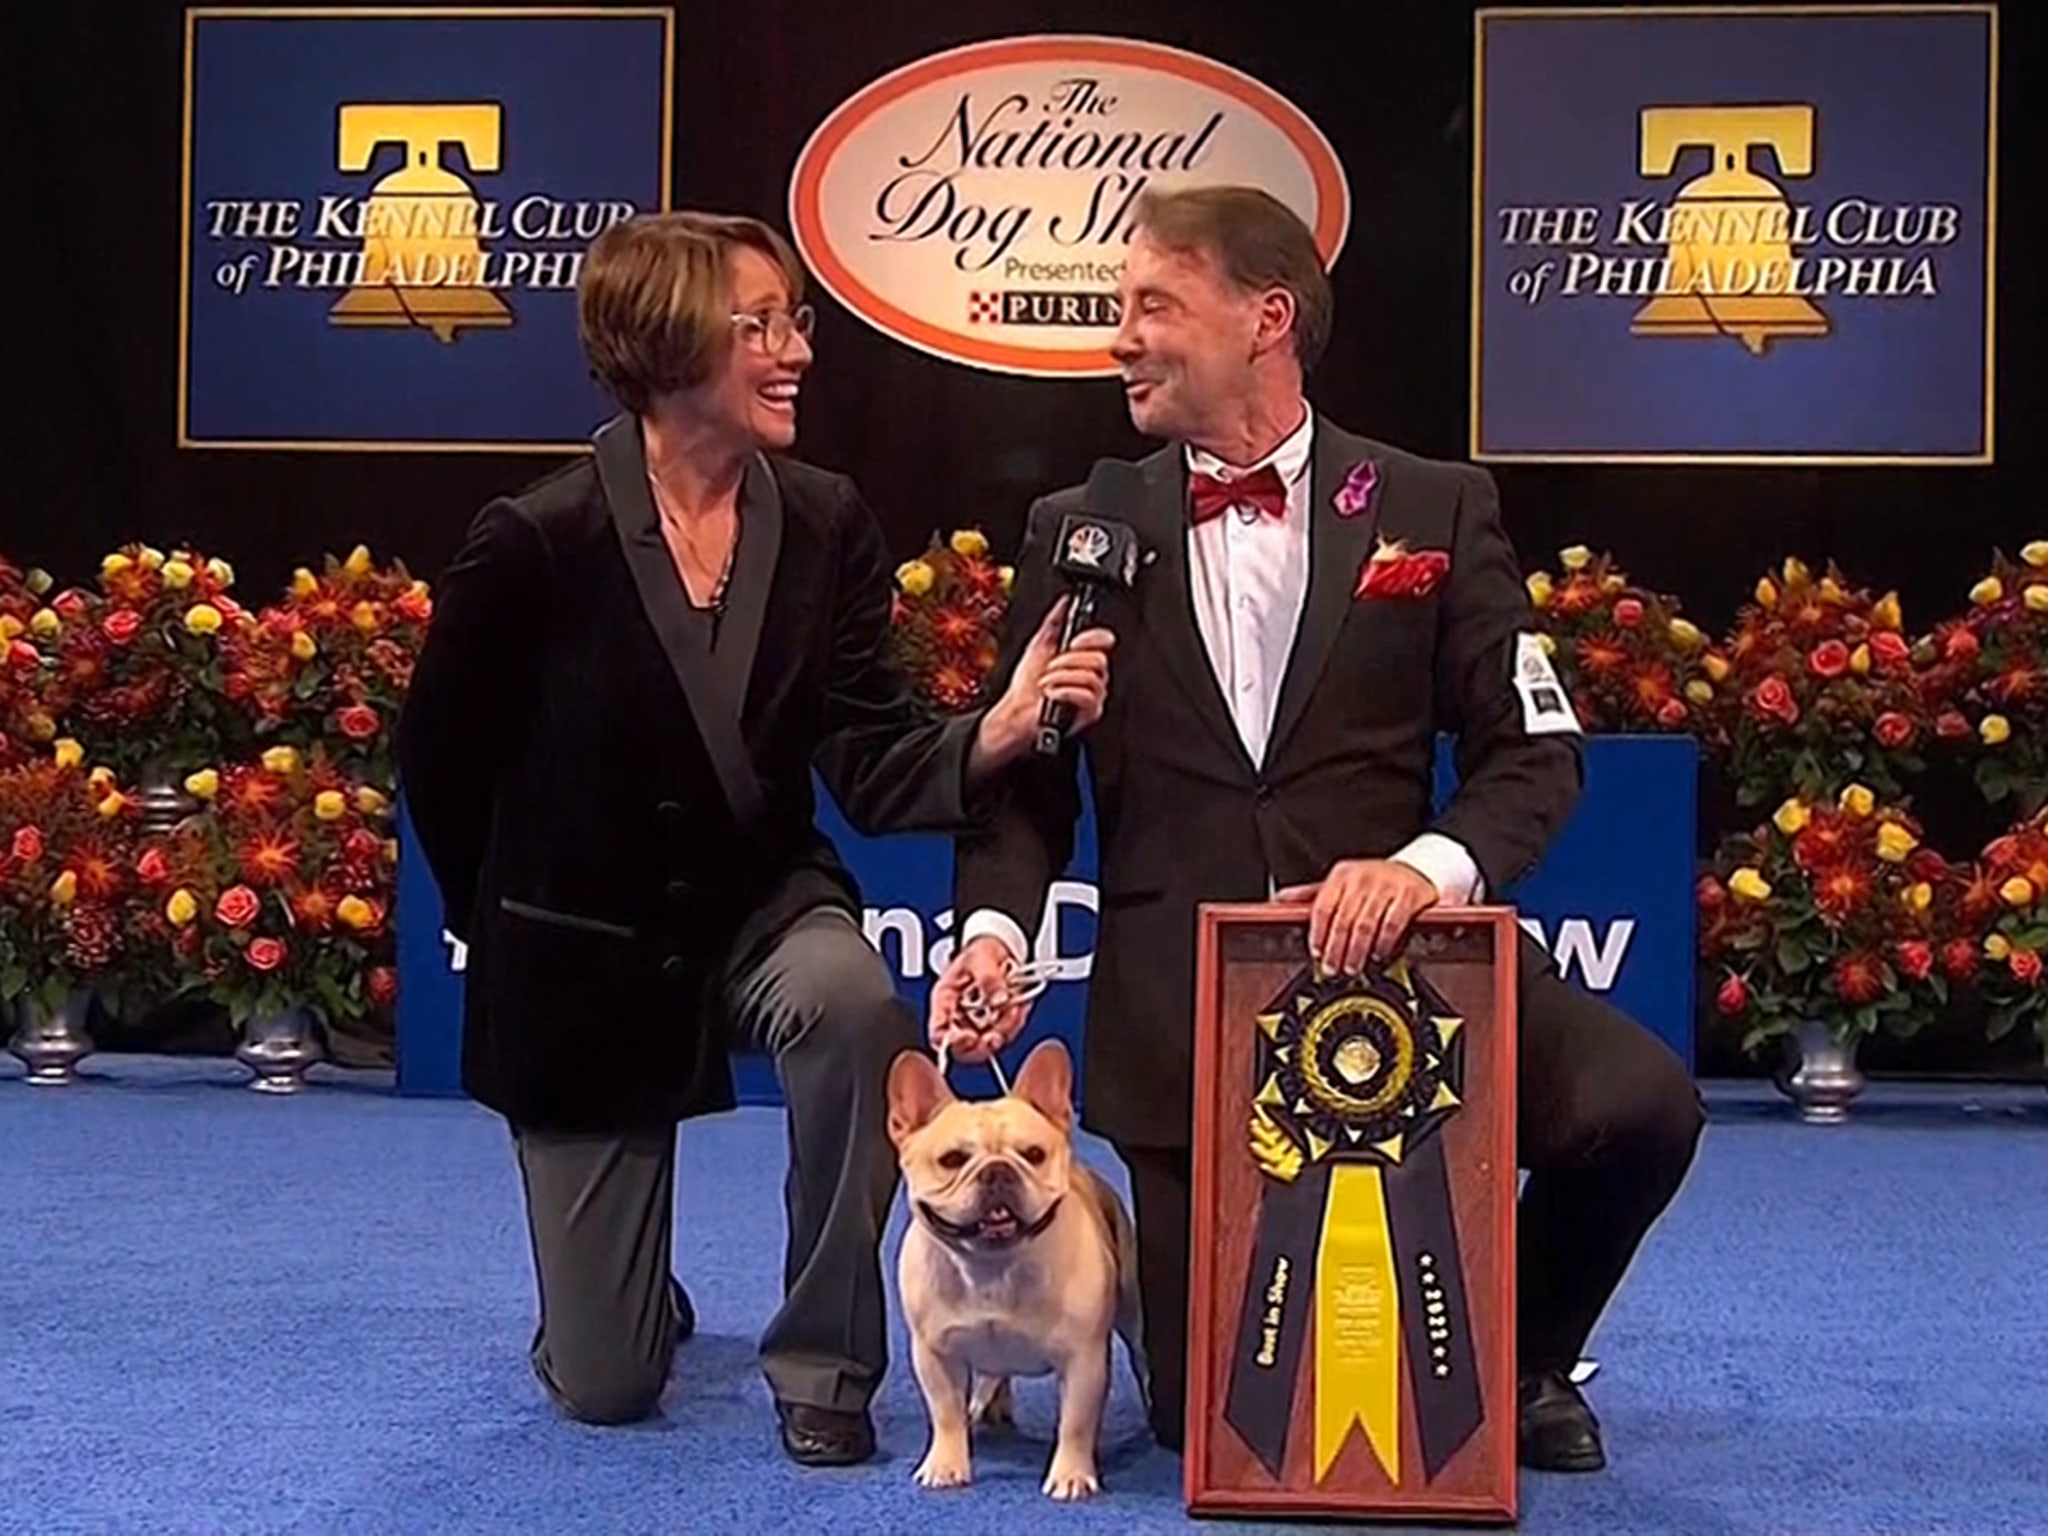 What Breed Of Dog Won The National Dogshow